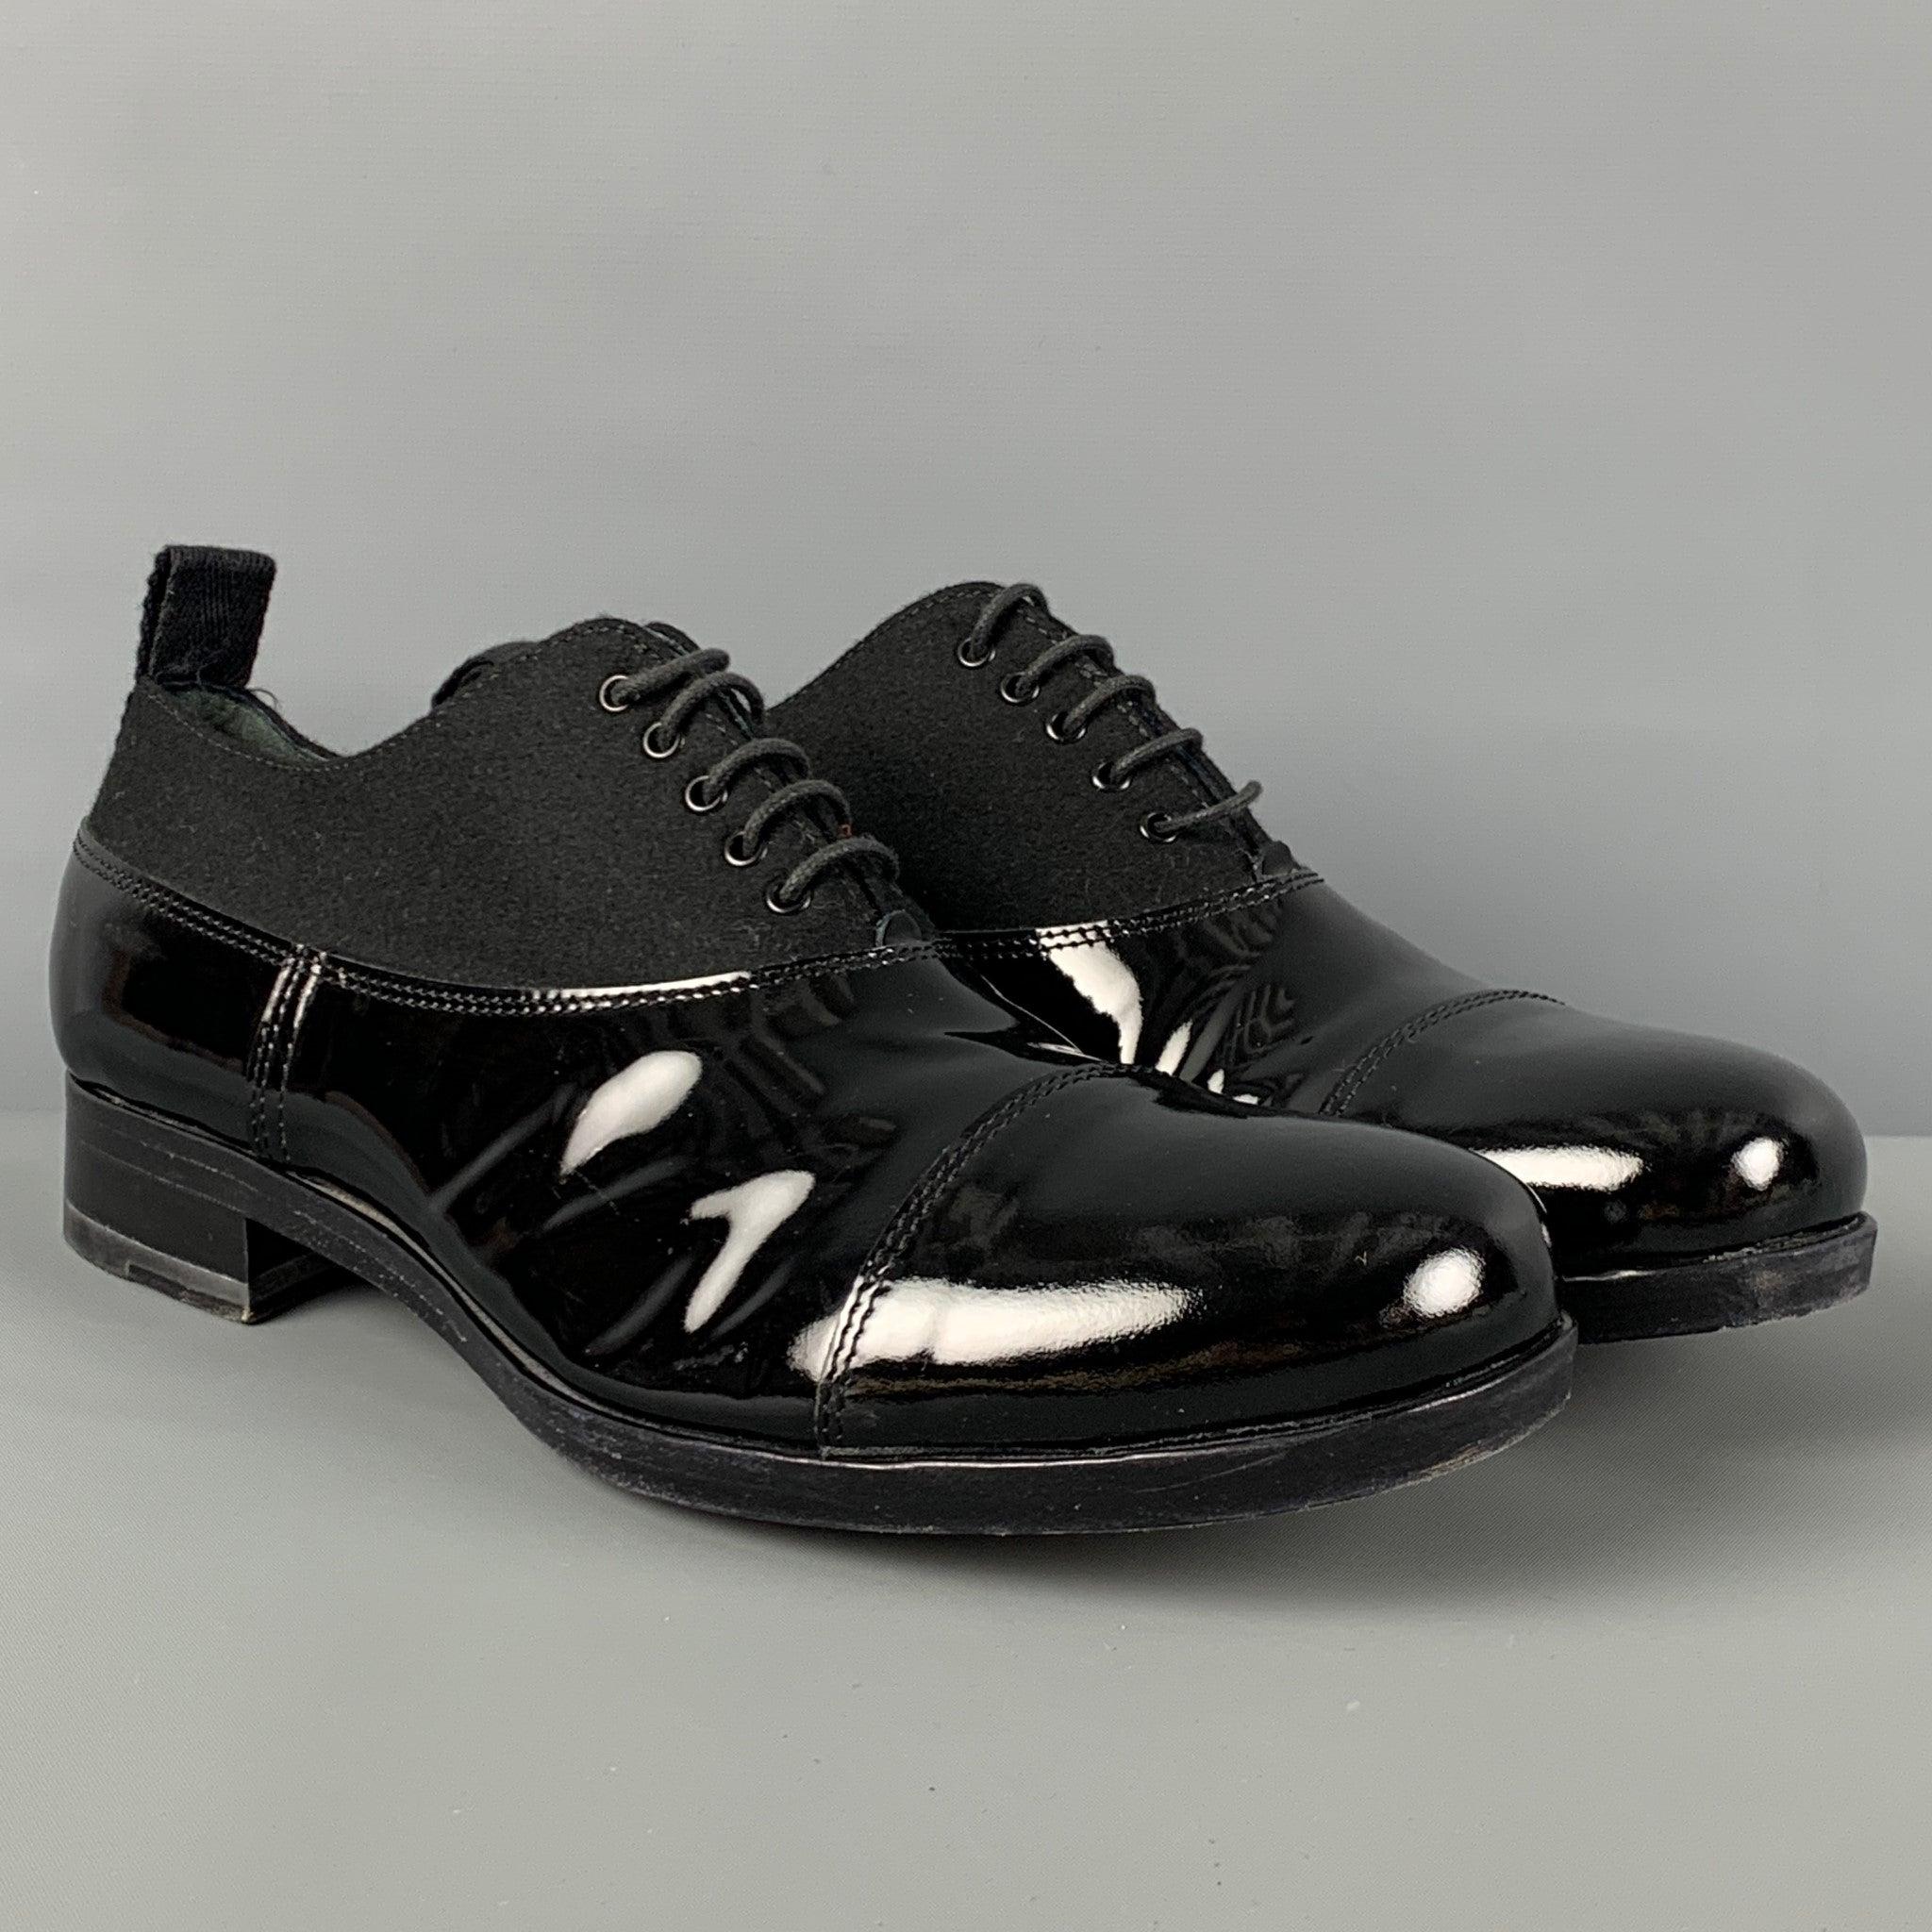 MIU MIU shoes comes in a black patent leather with a wool panel featuring a cap toe and a lace up closure. Made in Italy.
Very Good
Pre-Owned Condition. 

Marked:   8Outsole: 12 inches  x 3.75 inches 
  
  
 
Reference: 123279
Category: Lace Up